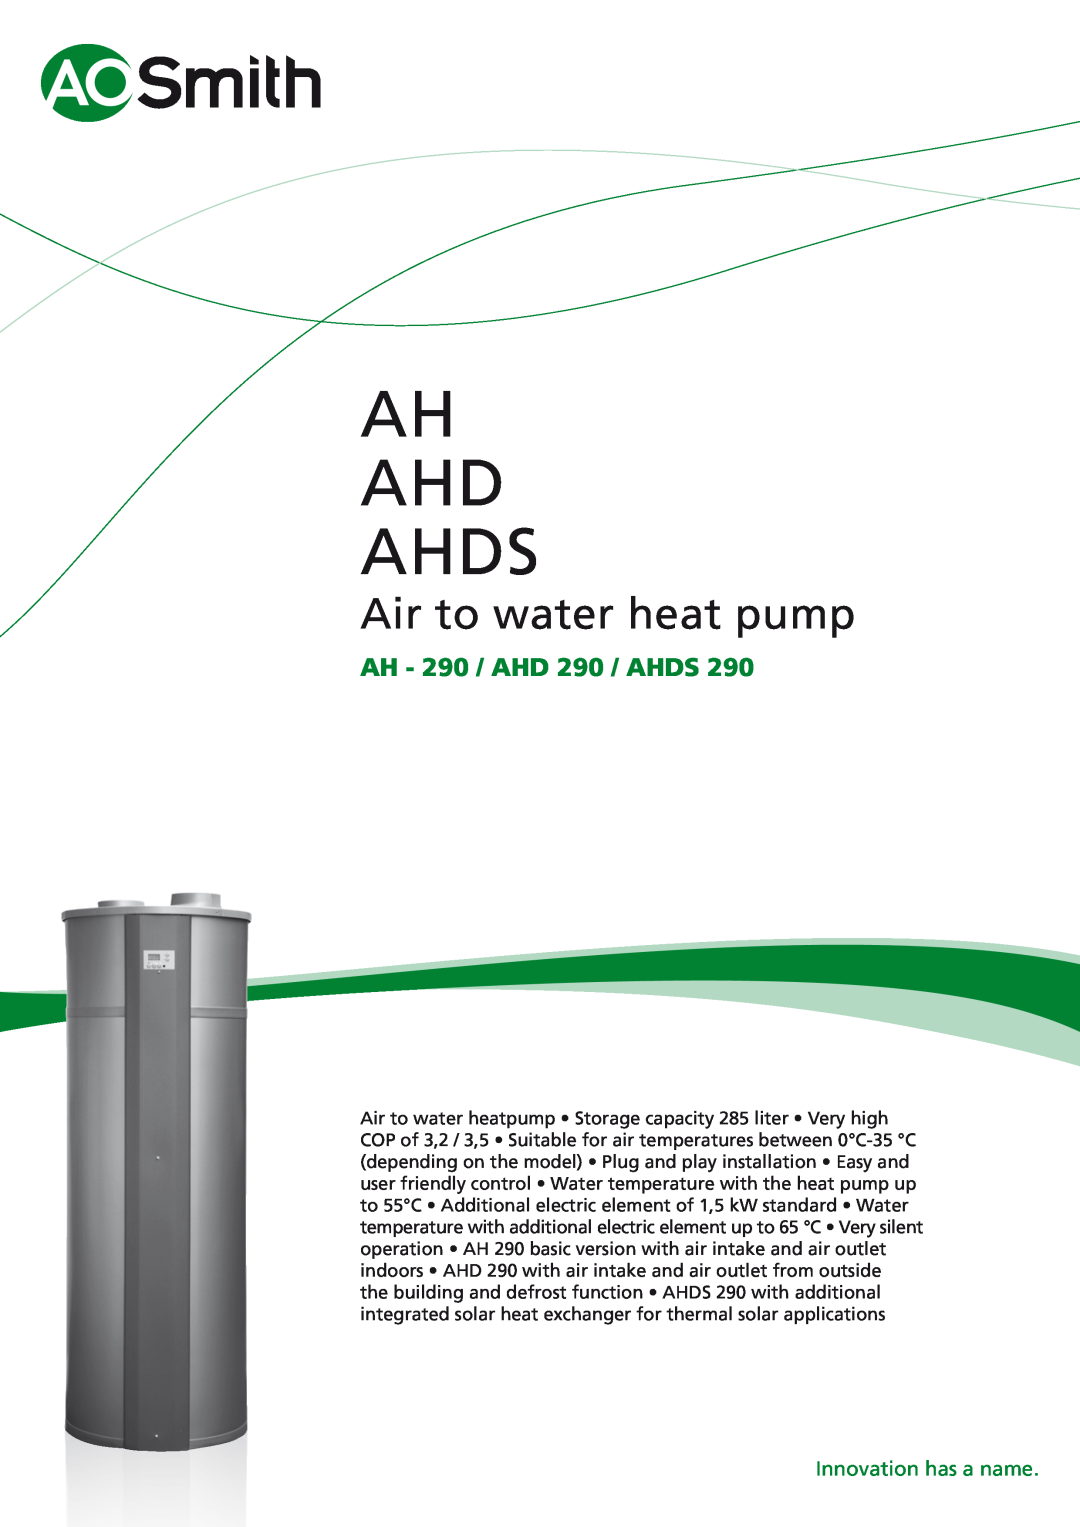 A.O. Smith AHDS 290 manual Ah Ahd Ahds, Air to water heat pump, AH - 290 / AHD 290 / AHDS, Innovation has a name 